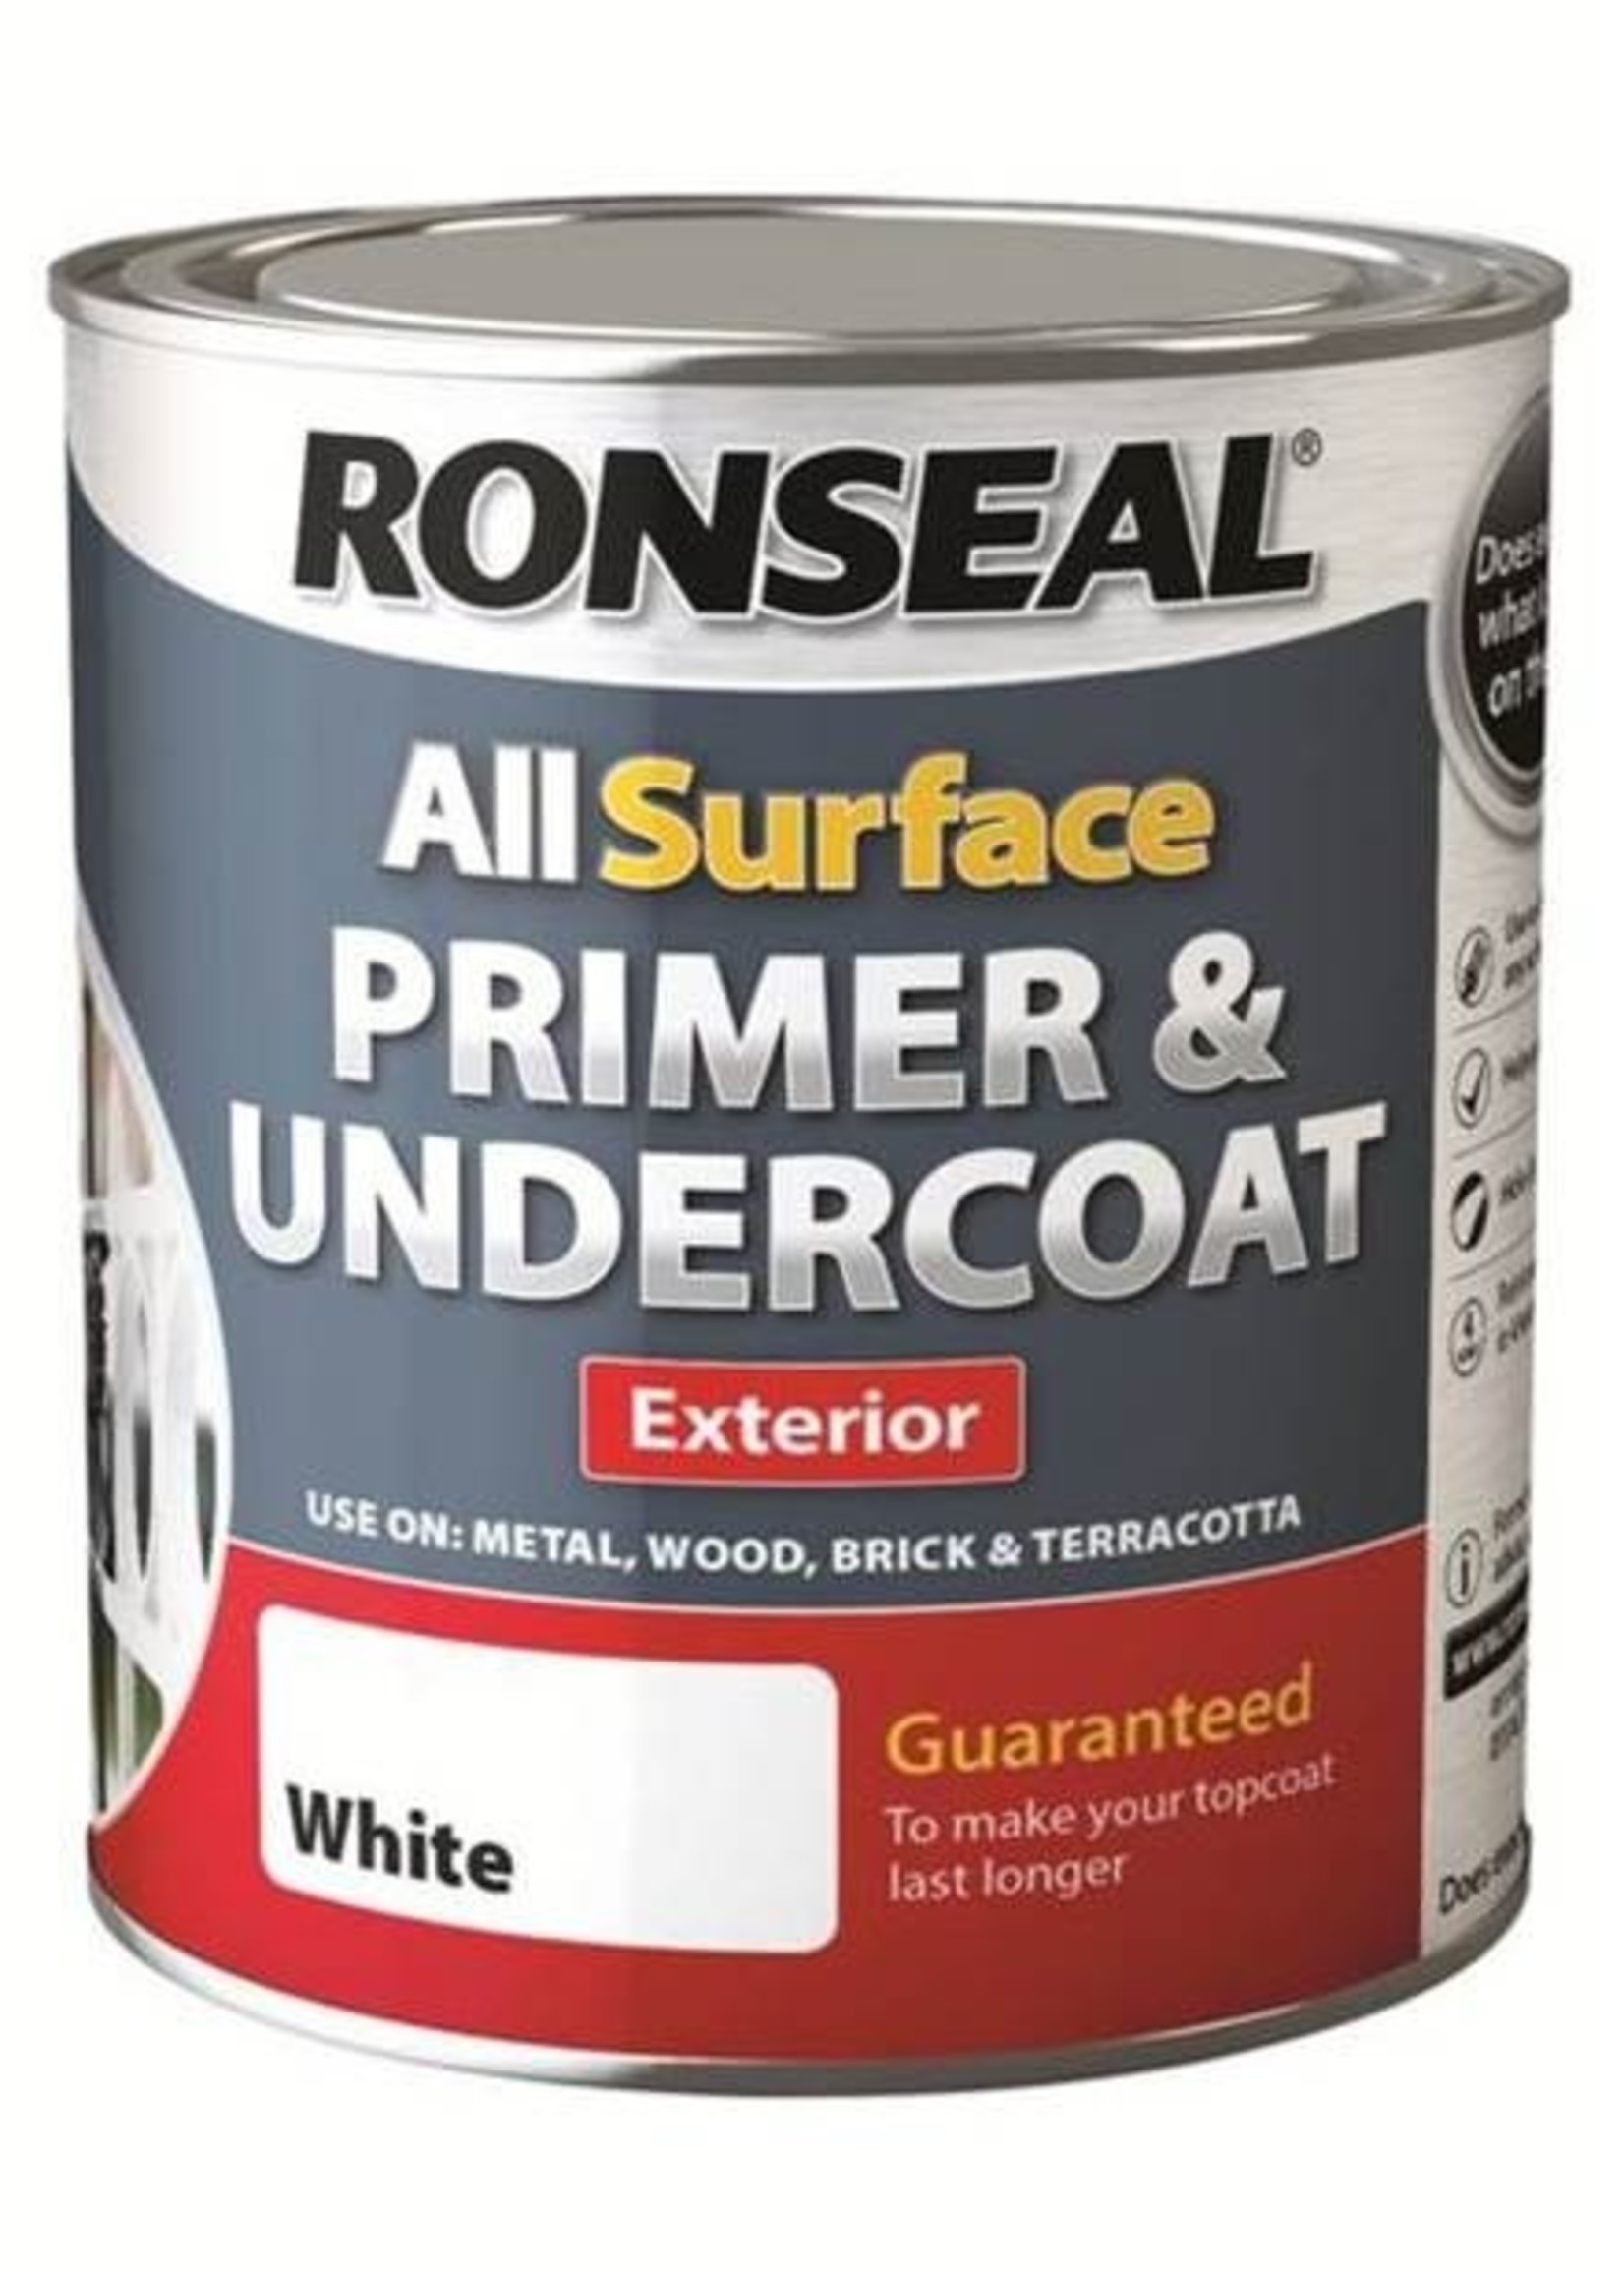 Ronseal Ronseal All Surface Primer & Undercoat 250ml Exterior